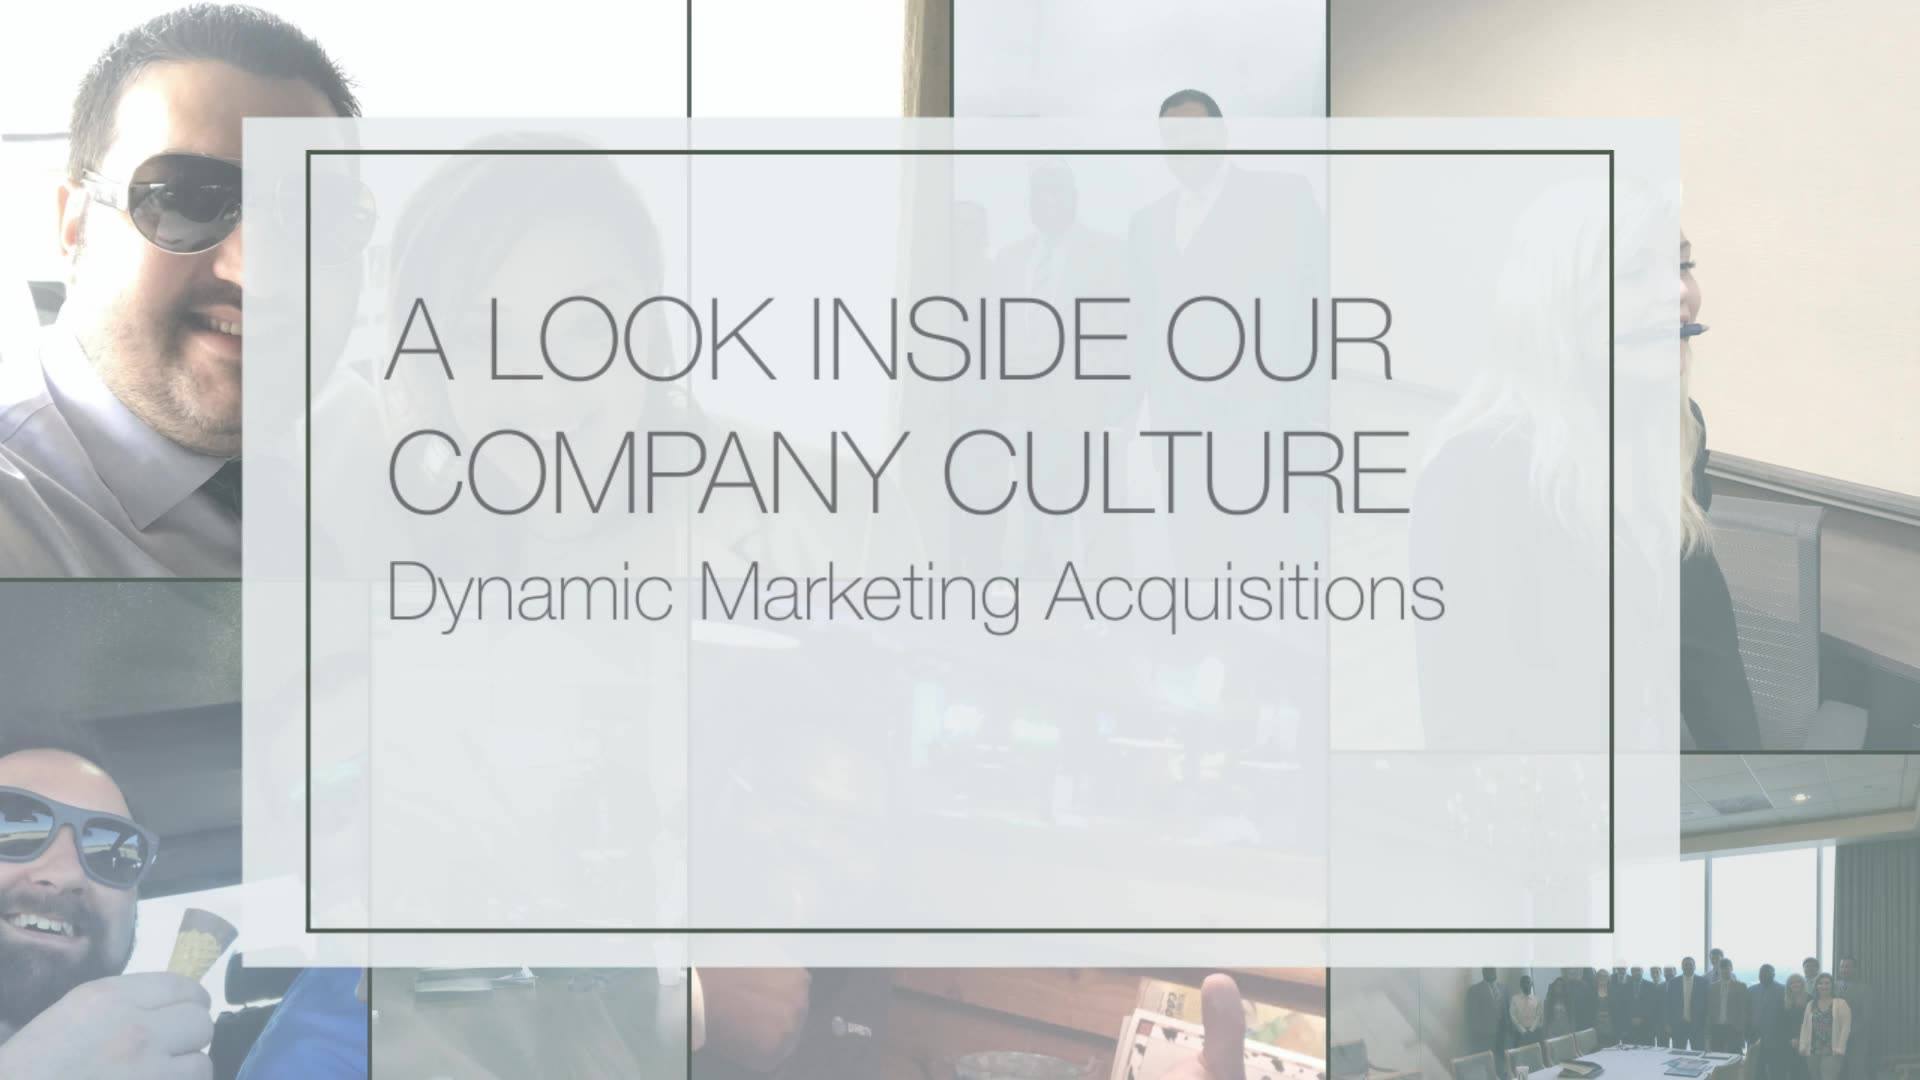 Dynamic Marketing Acquisitions